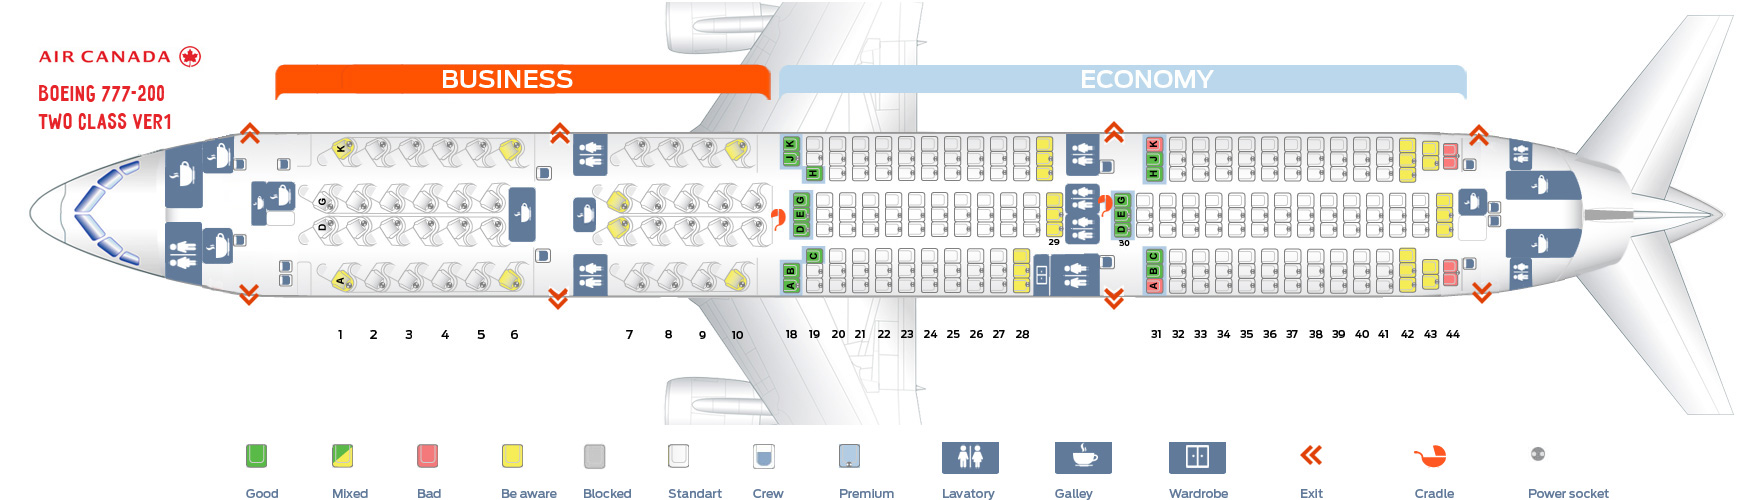 Seat map Air Canada Boeing-777-200 Two Class version 1